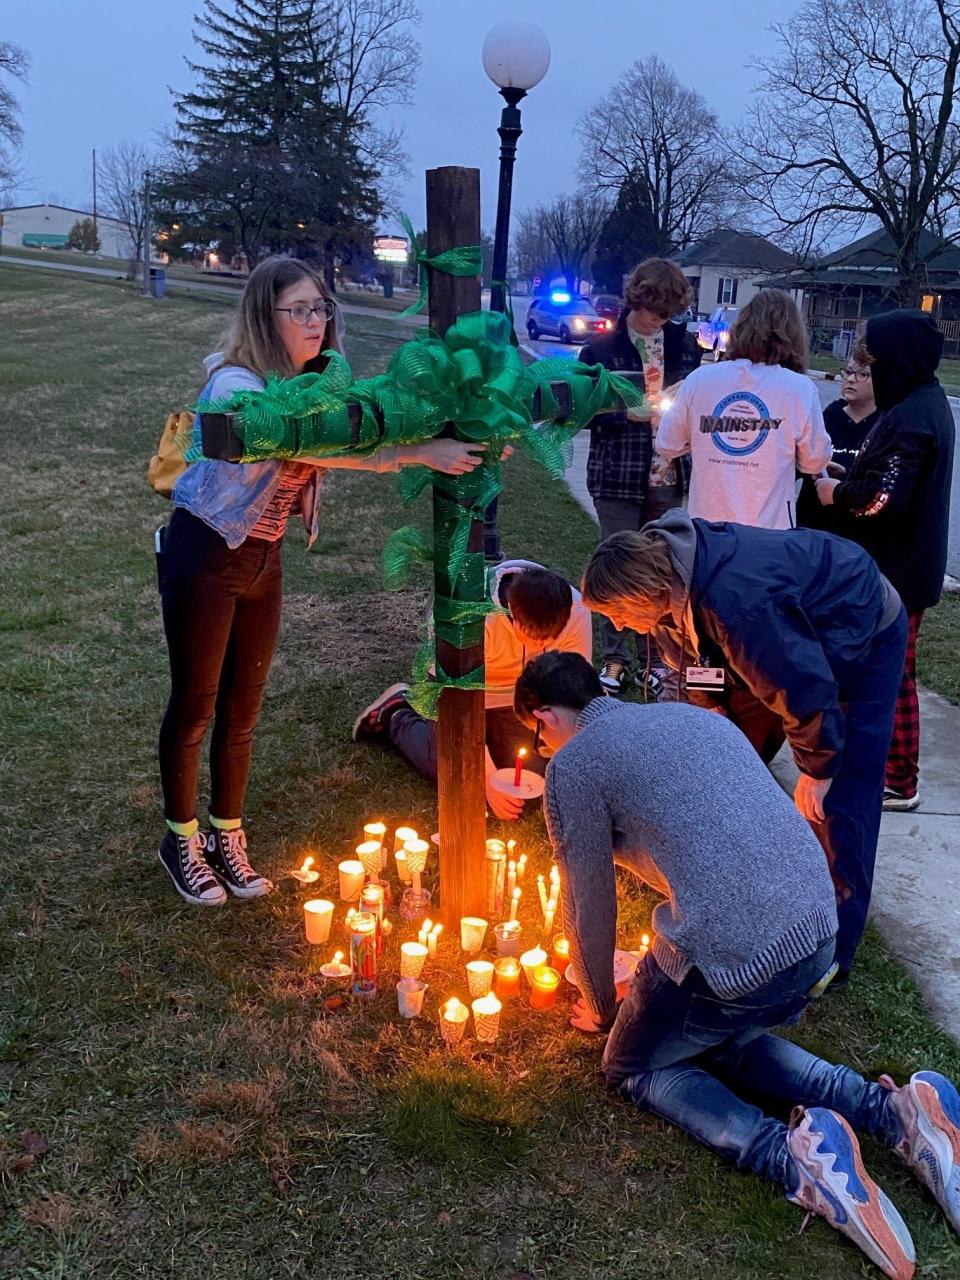 Eaton and Delaware County residents attach green ribbons to a wooden cross Thursday evening at Norseman Park in Eaton. A candlelight vigil was held in honor of Scottie Dean Morris, a 14-year-old Delta Middle School student who hasn't been seen since March 16.